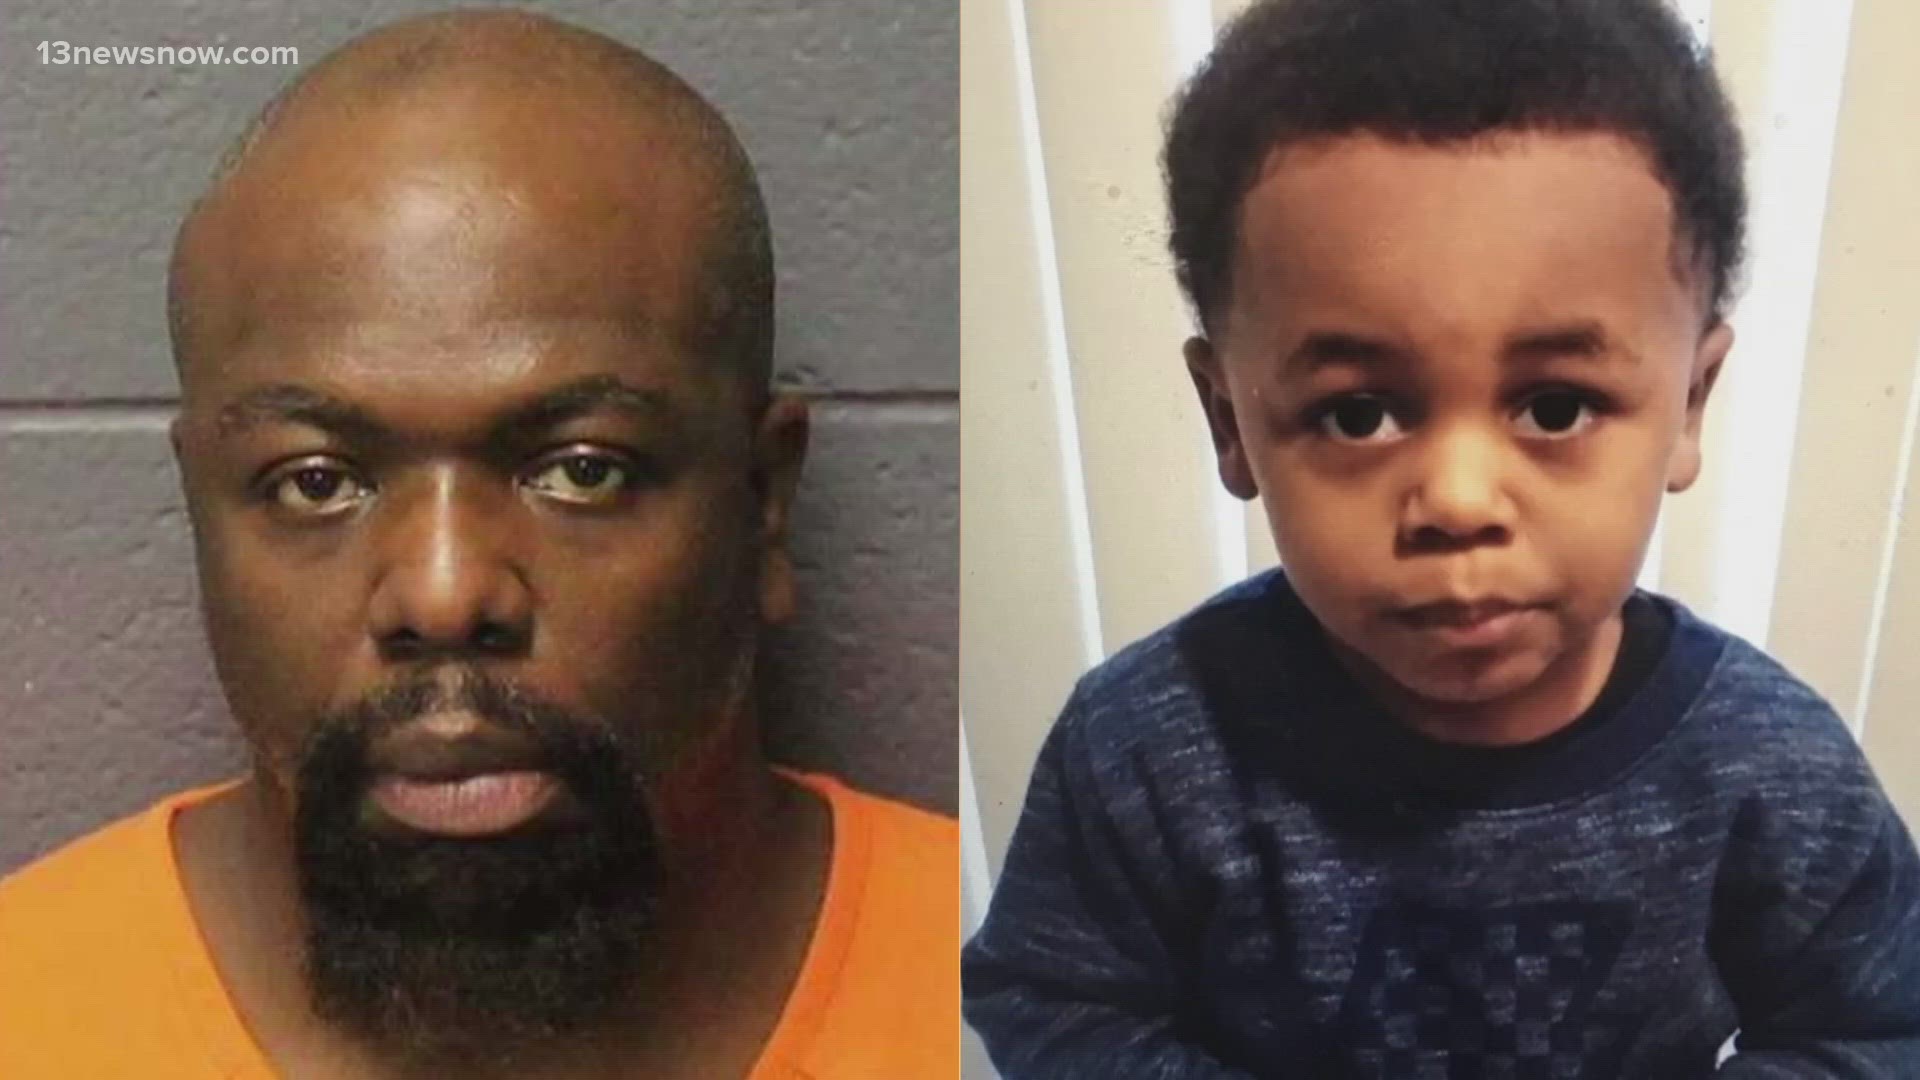 Cory Bigsby, the Hampton man charged with murdering his 4-year-old son Codi, has been granted an $80,000 bond with restrictions after spending the last year in jail.